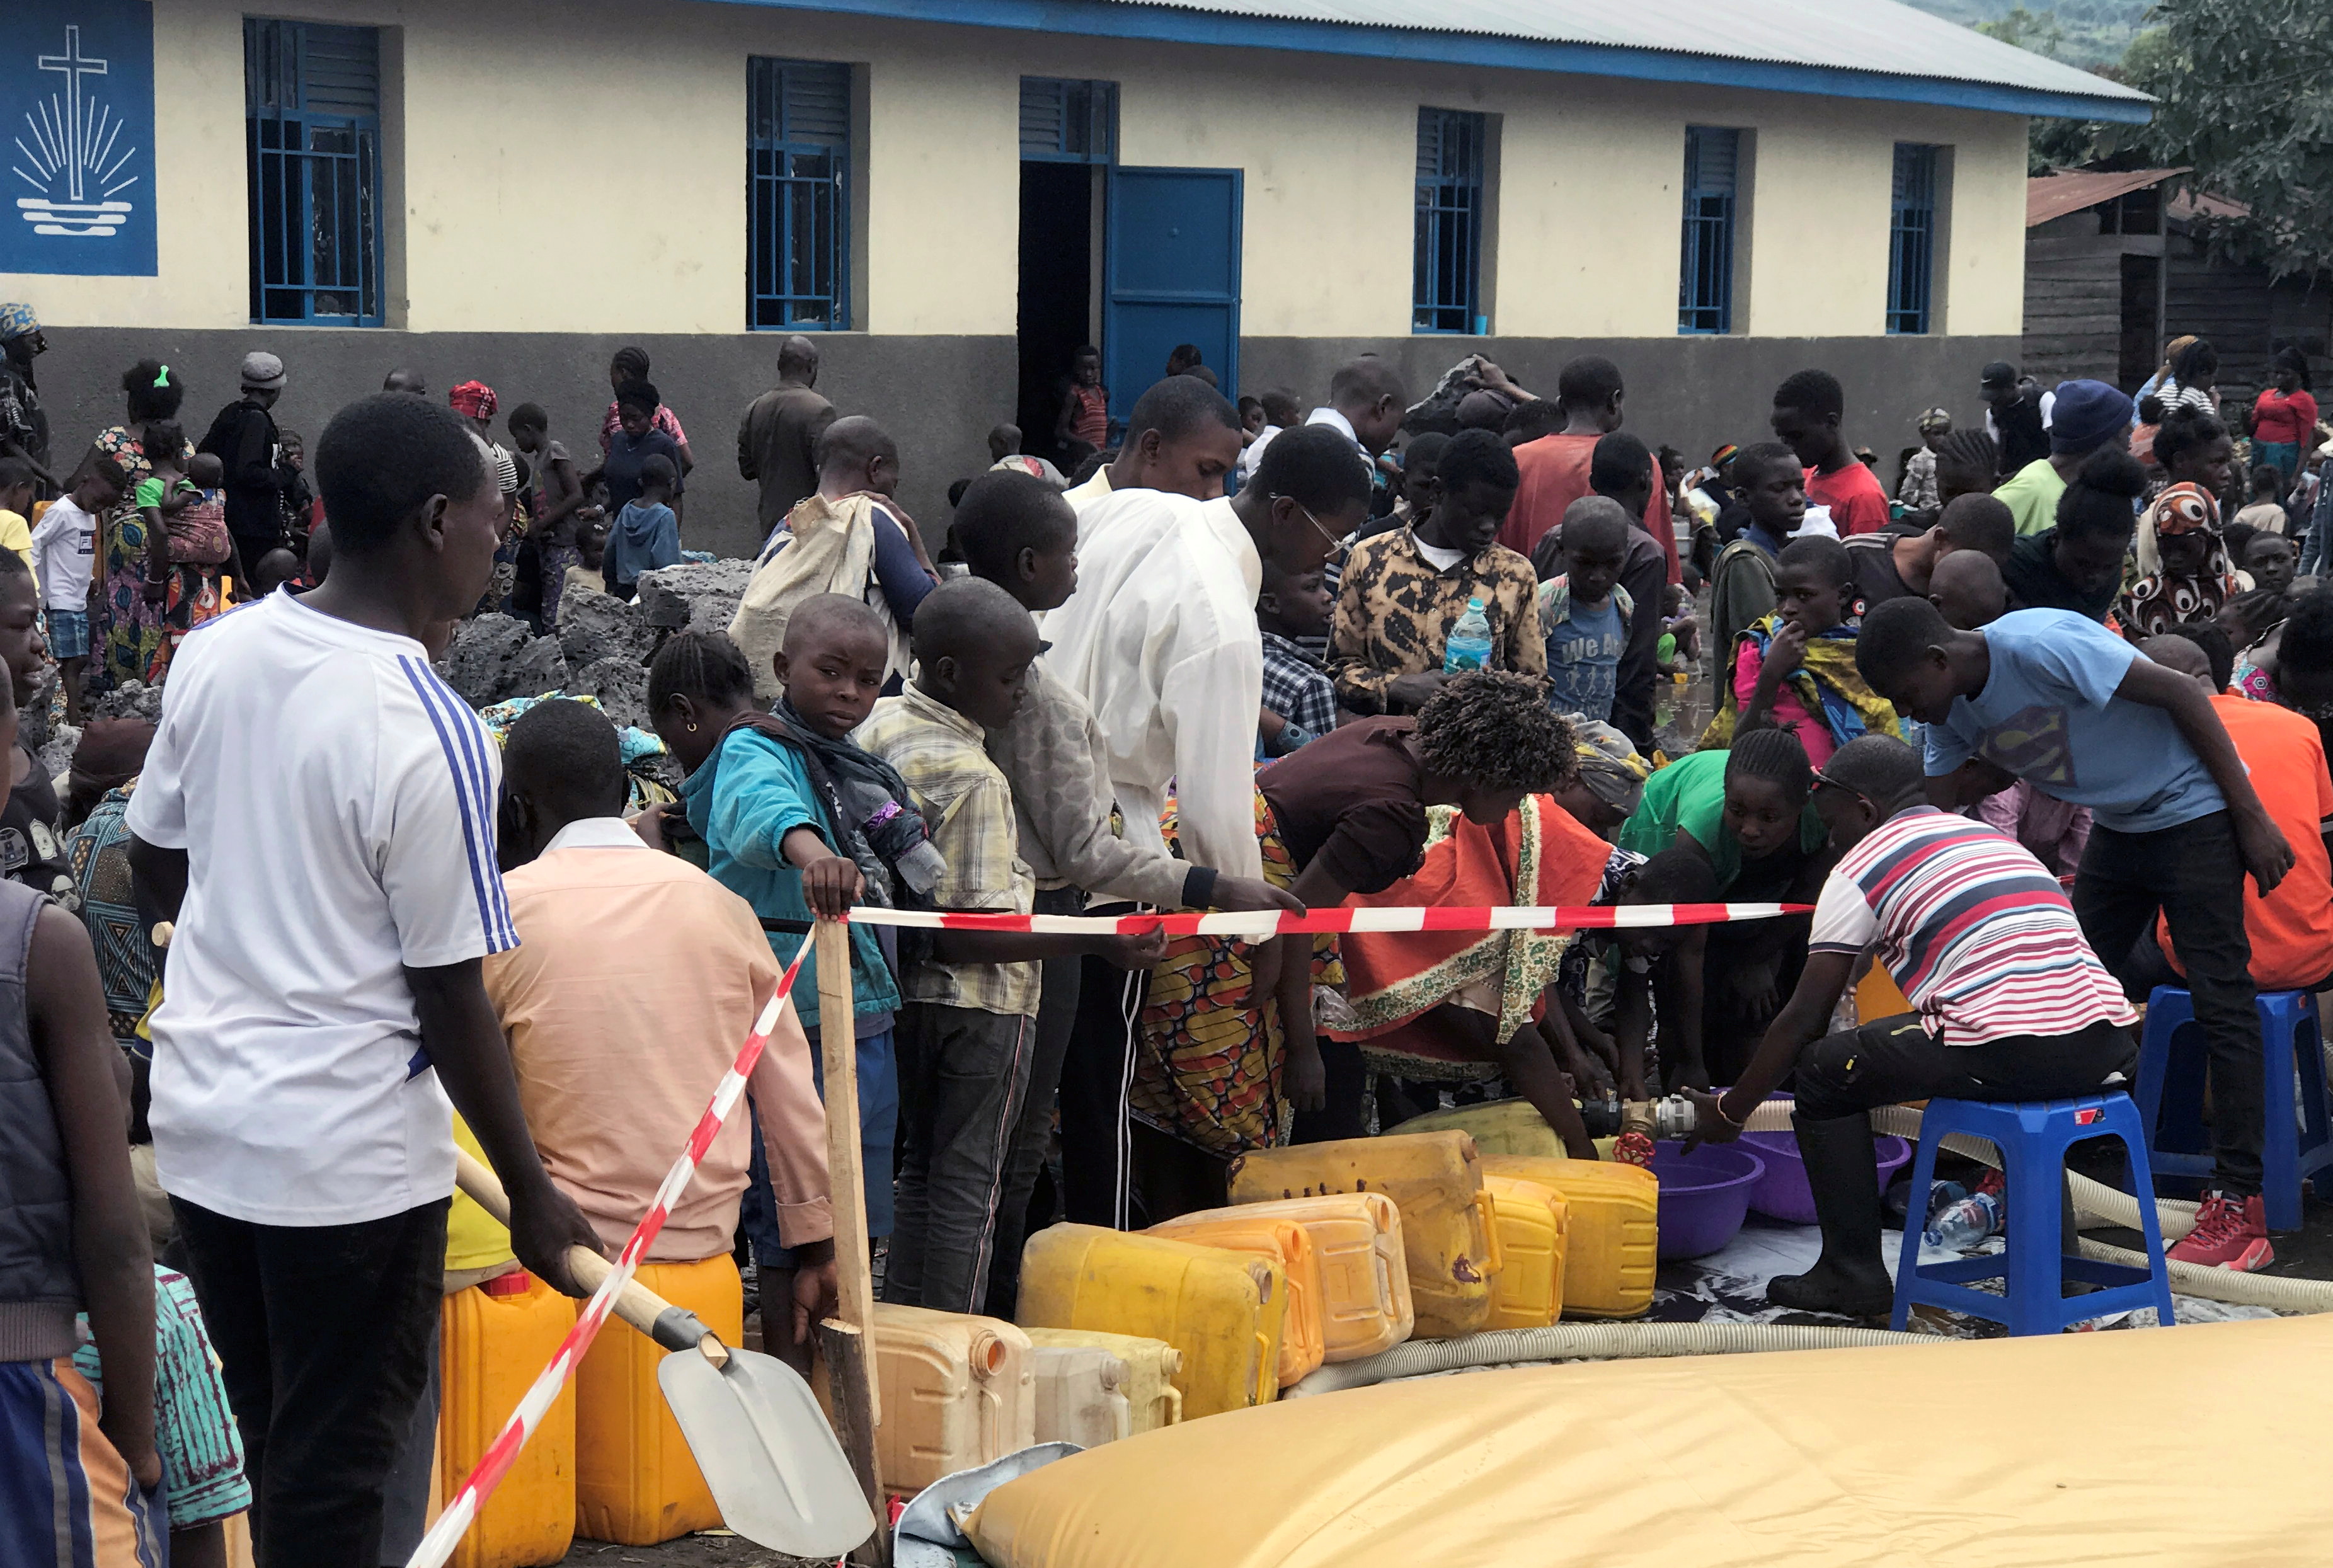 Internally displaced Congolese people who fled from recurrent earth tremors after the volcanic eruption of Mount Nyiragongo, collect water outside a church in Sake town, near Goma